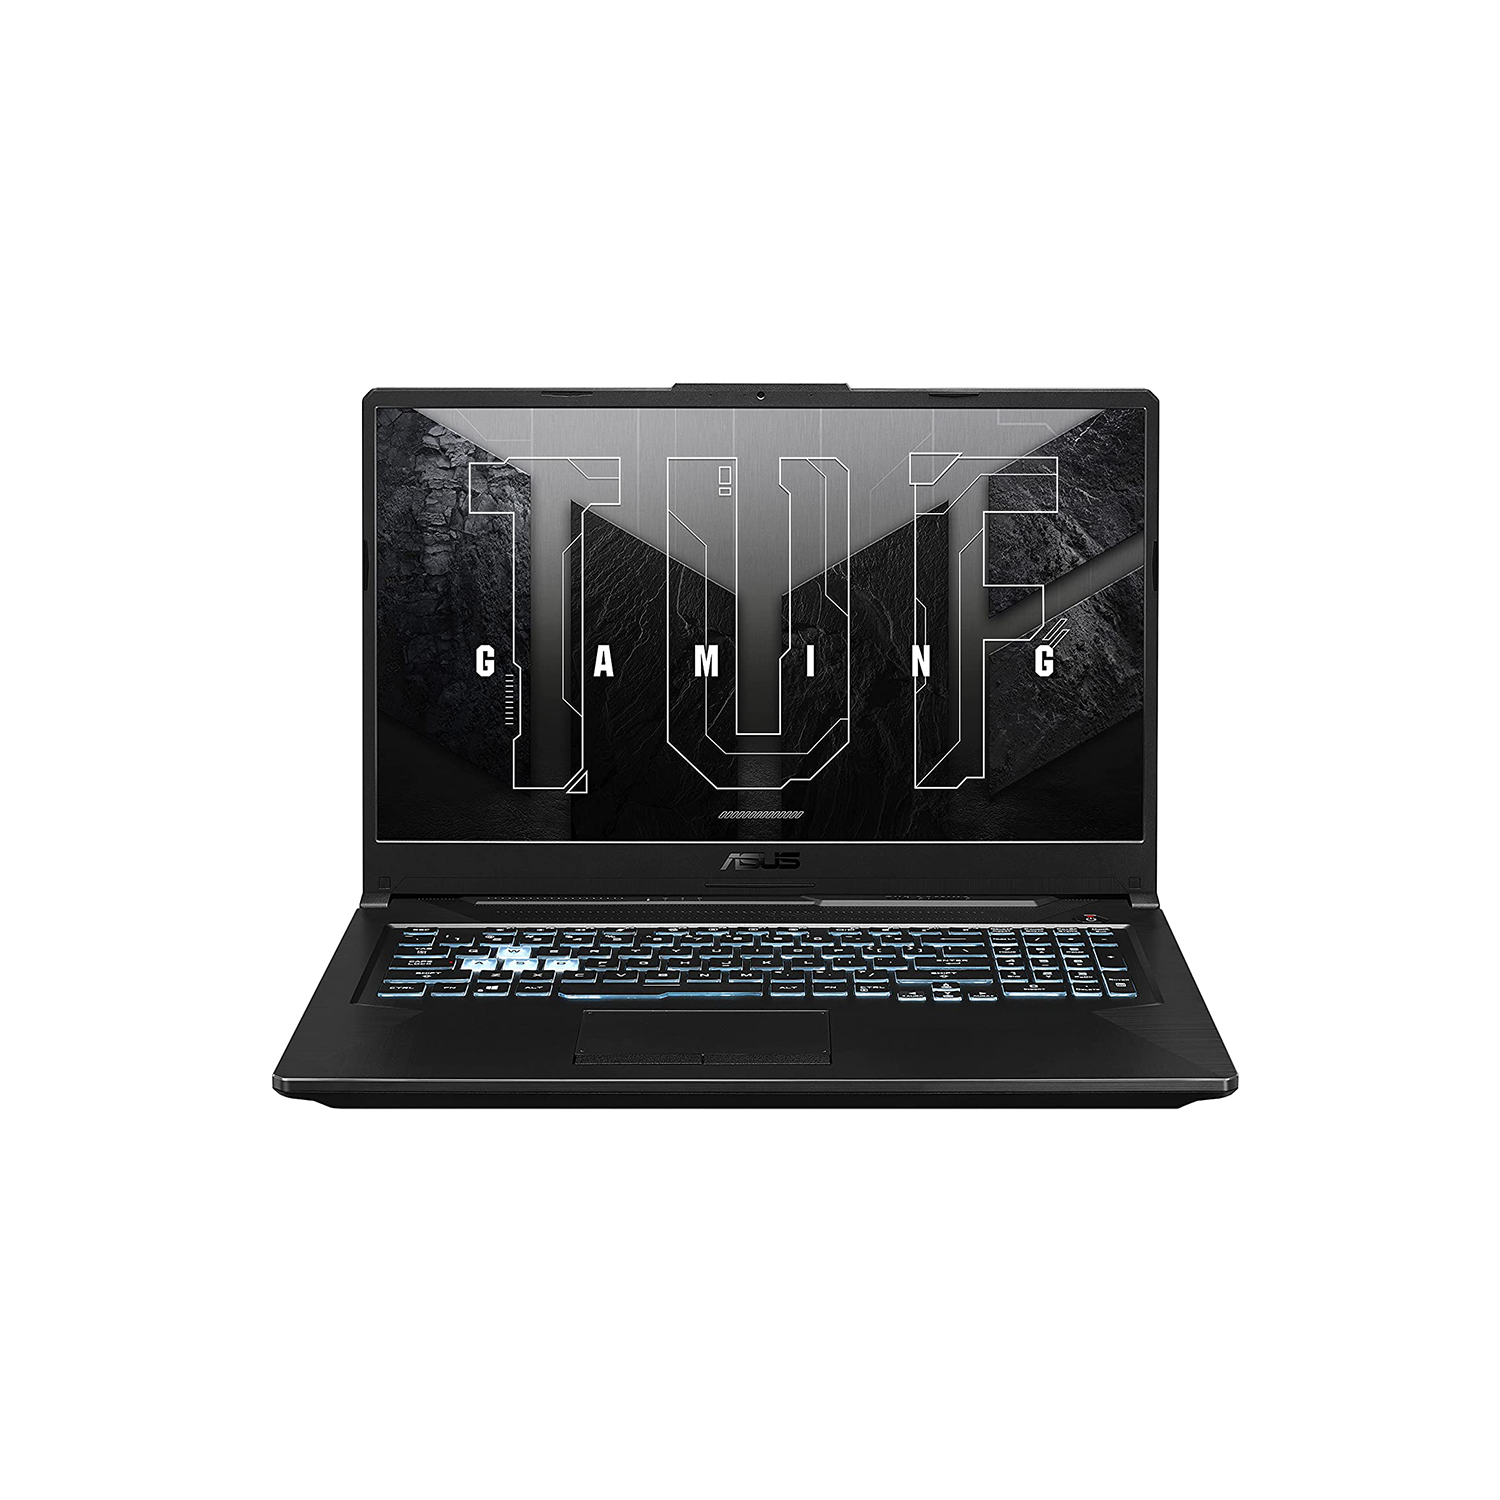 ASUS TUF Gaming A17 Gaming Laptop, 17.3 144Hz Full HD IPS-Type, AMD Ryzen 7 4800H, GeForce RTX3050Ti, 16GB DDR4, 512GB PCIe SSD, Wi-Fi 6, Windows 11 Home, FA706IE-DS71-CA